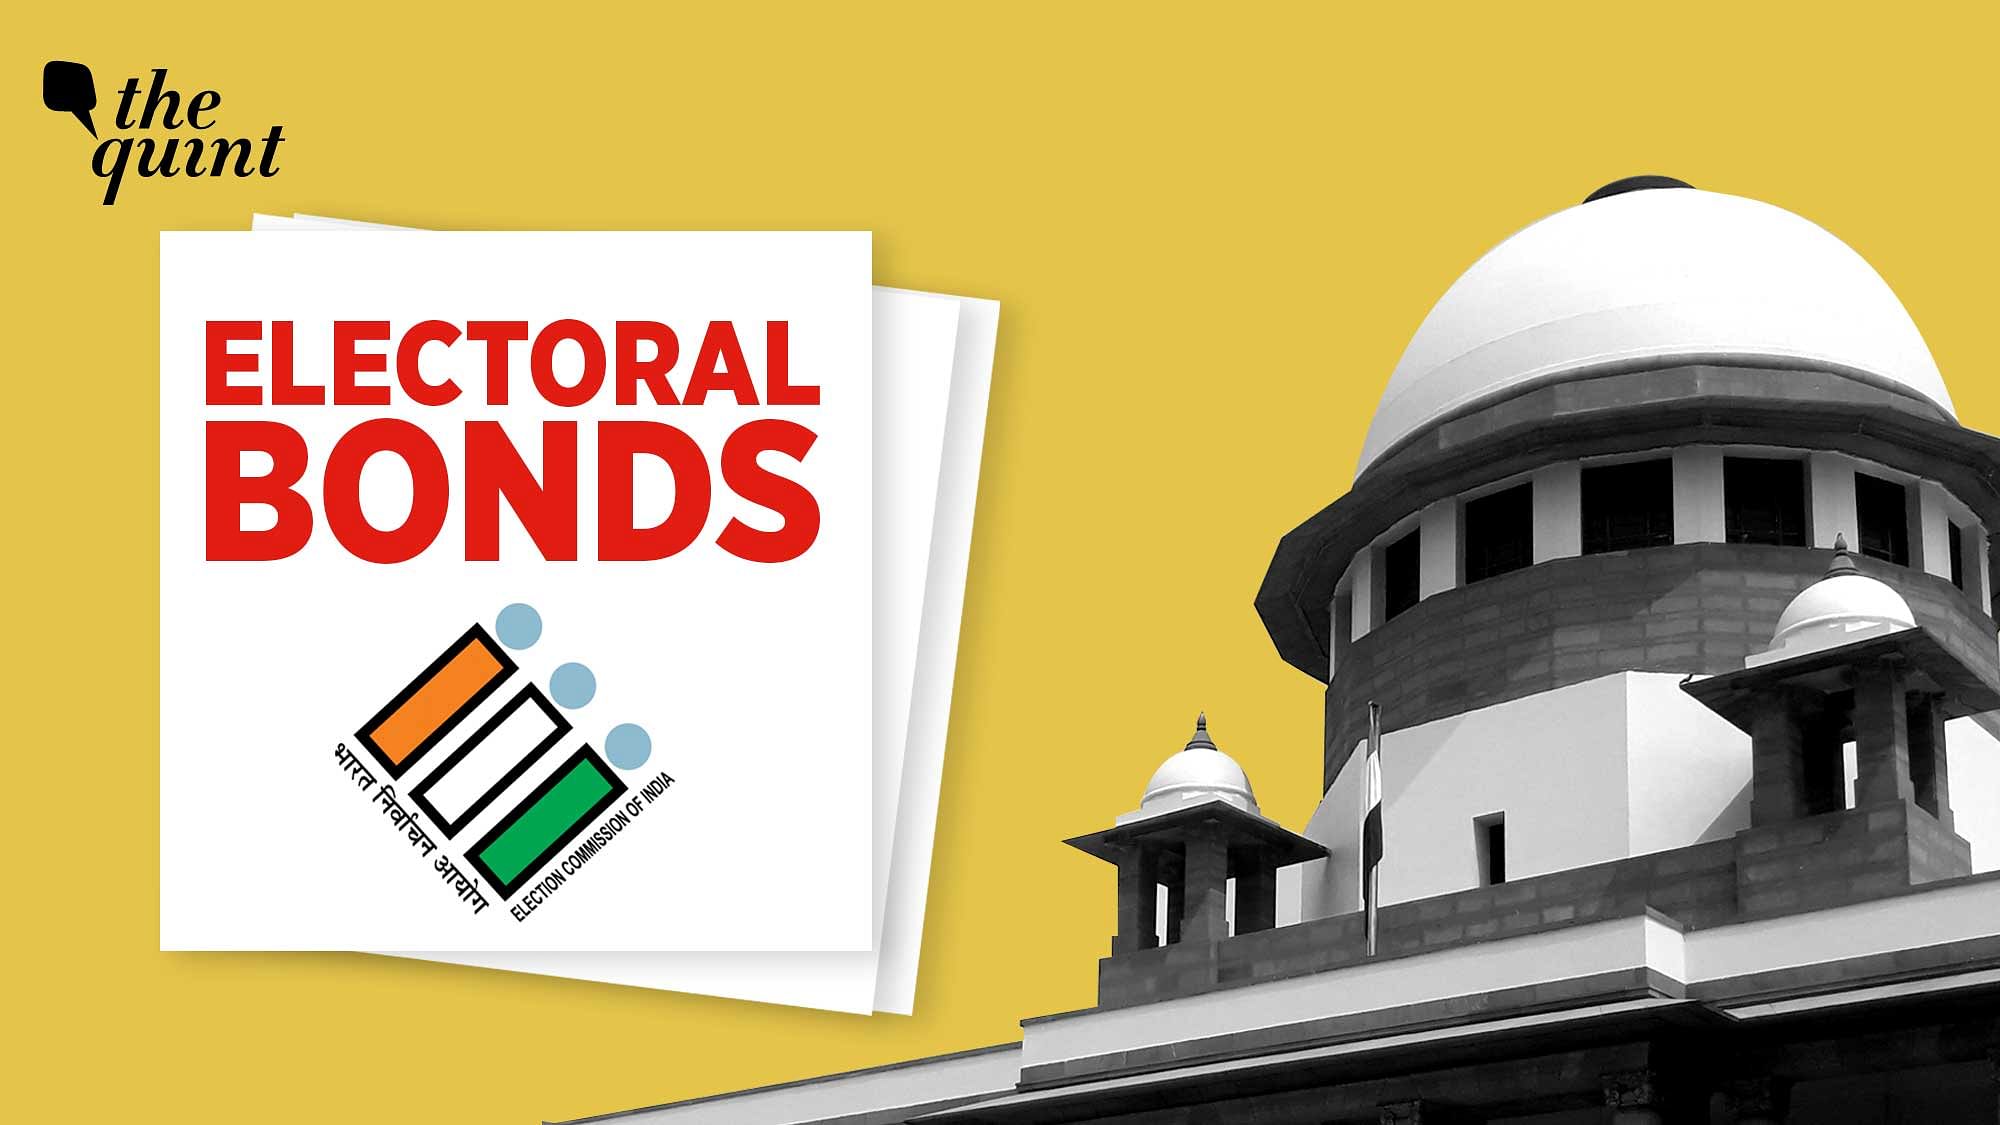 <div class="paragraphs"><p>The Election Commission of India (ECI) on Thursday made the<a href="https://www.thequint.com/news/politics/election-commission-eci-electoral-bonds-data-supreme-court-sbi"> electoral bonds data public</a> as per the orders of the Supreme Court of India.</p></div>